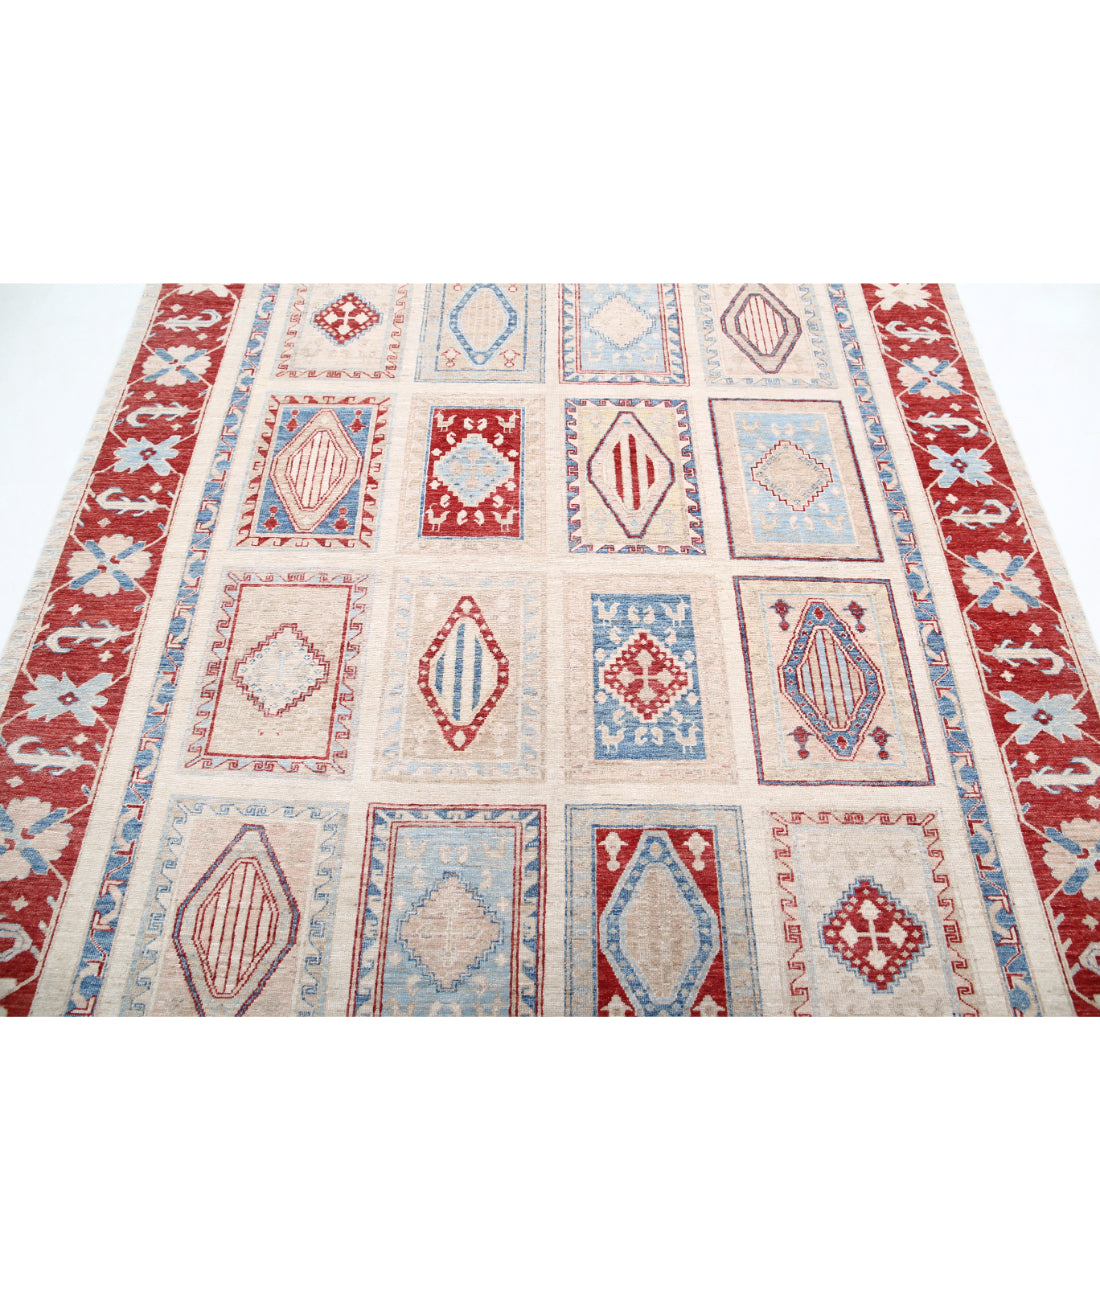 Hand Knotted Bakhtiari Wool Rug - 6'6'' x 7'10'' 6'6'' x 7'10'' (195 X 235) / Ivory / Red